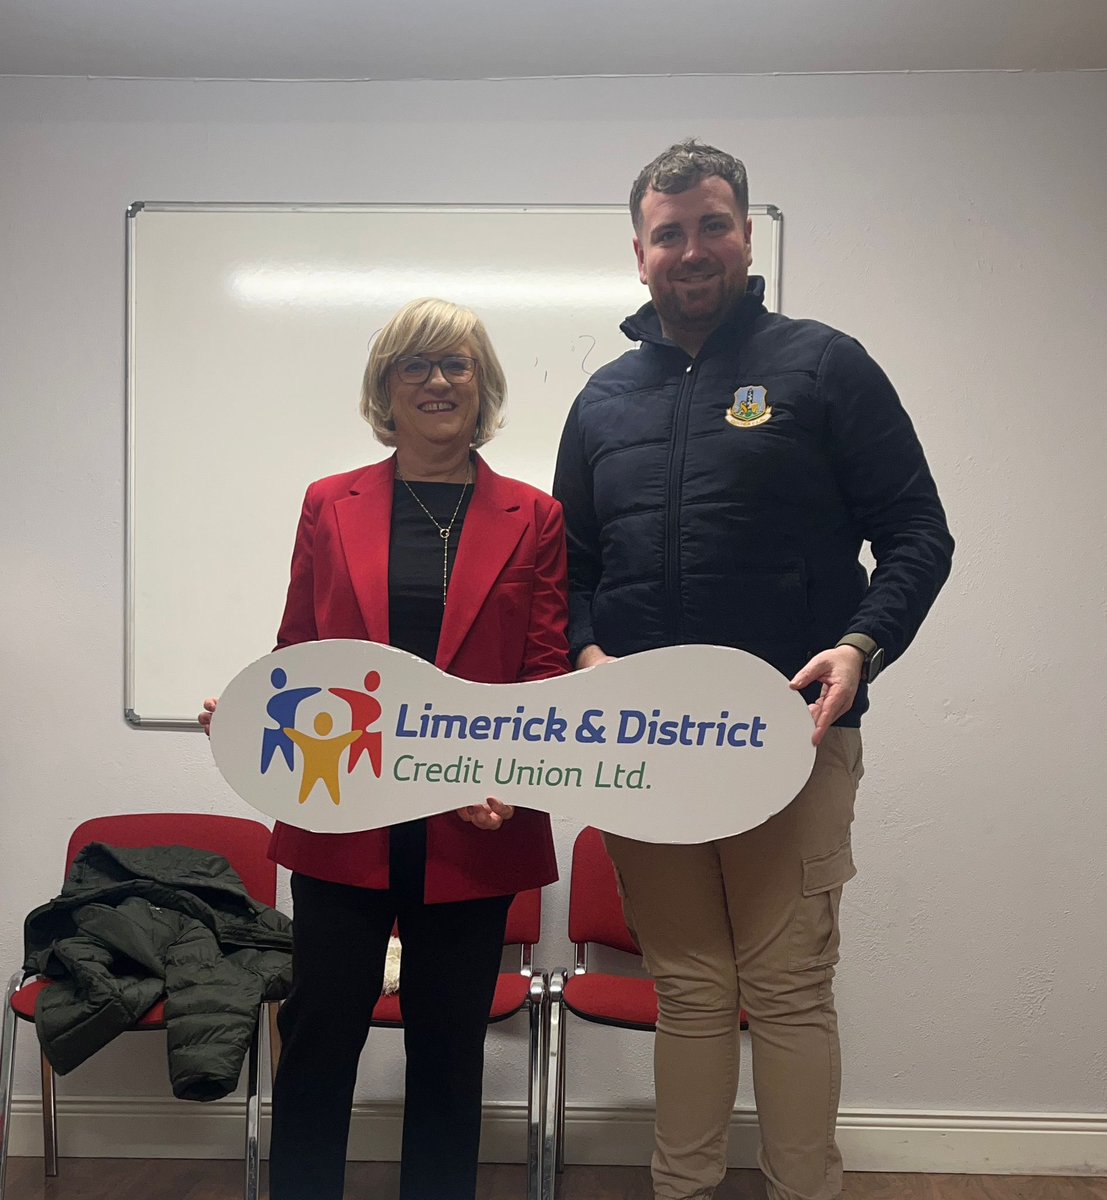 Limerick & District Credit Union are delighted to support @ClaughaunCLG ! 💚 Pictured here is Fiona Cox B.D.M presenting a cheque to Jack Wallace Chairman of Claughaun GAA Club!